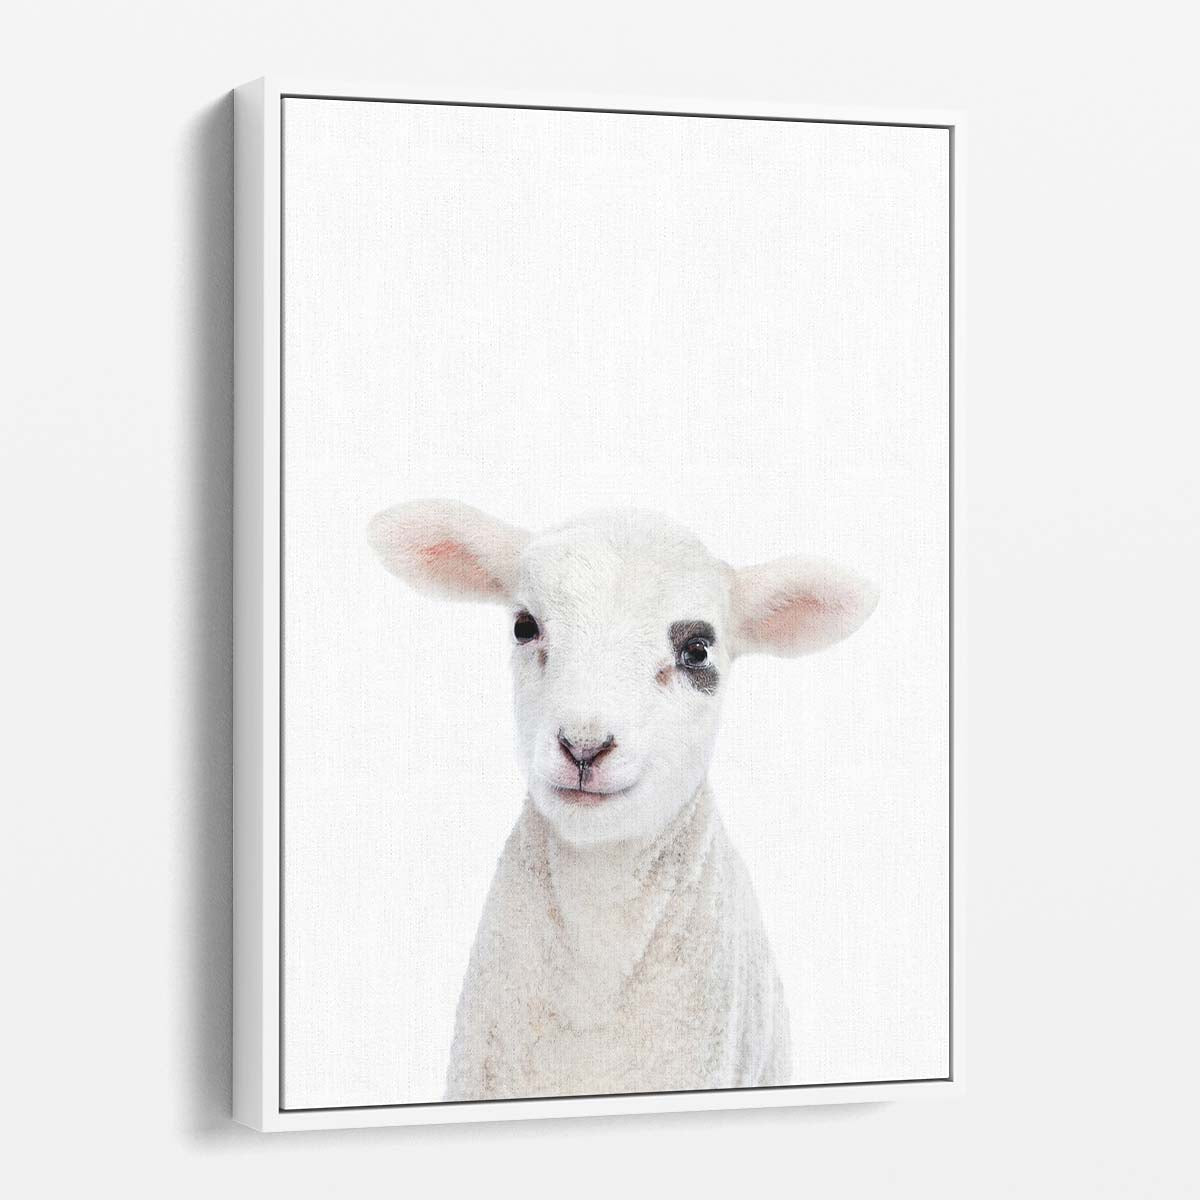 Pastoral Baby Lamb Portrait Photography, Farmhouse Wall Art by Luxuriance Designs, made in USA